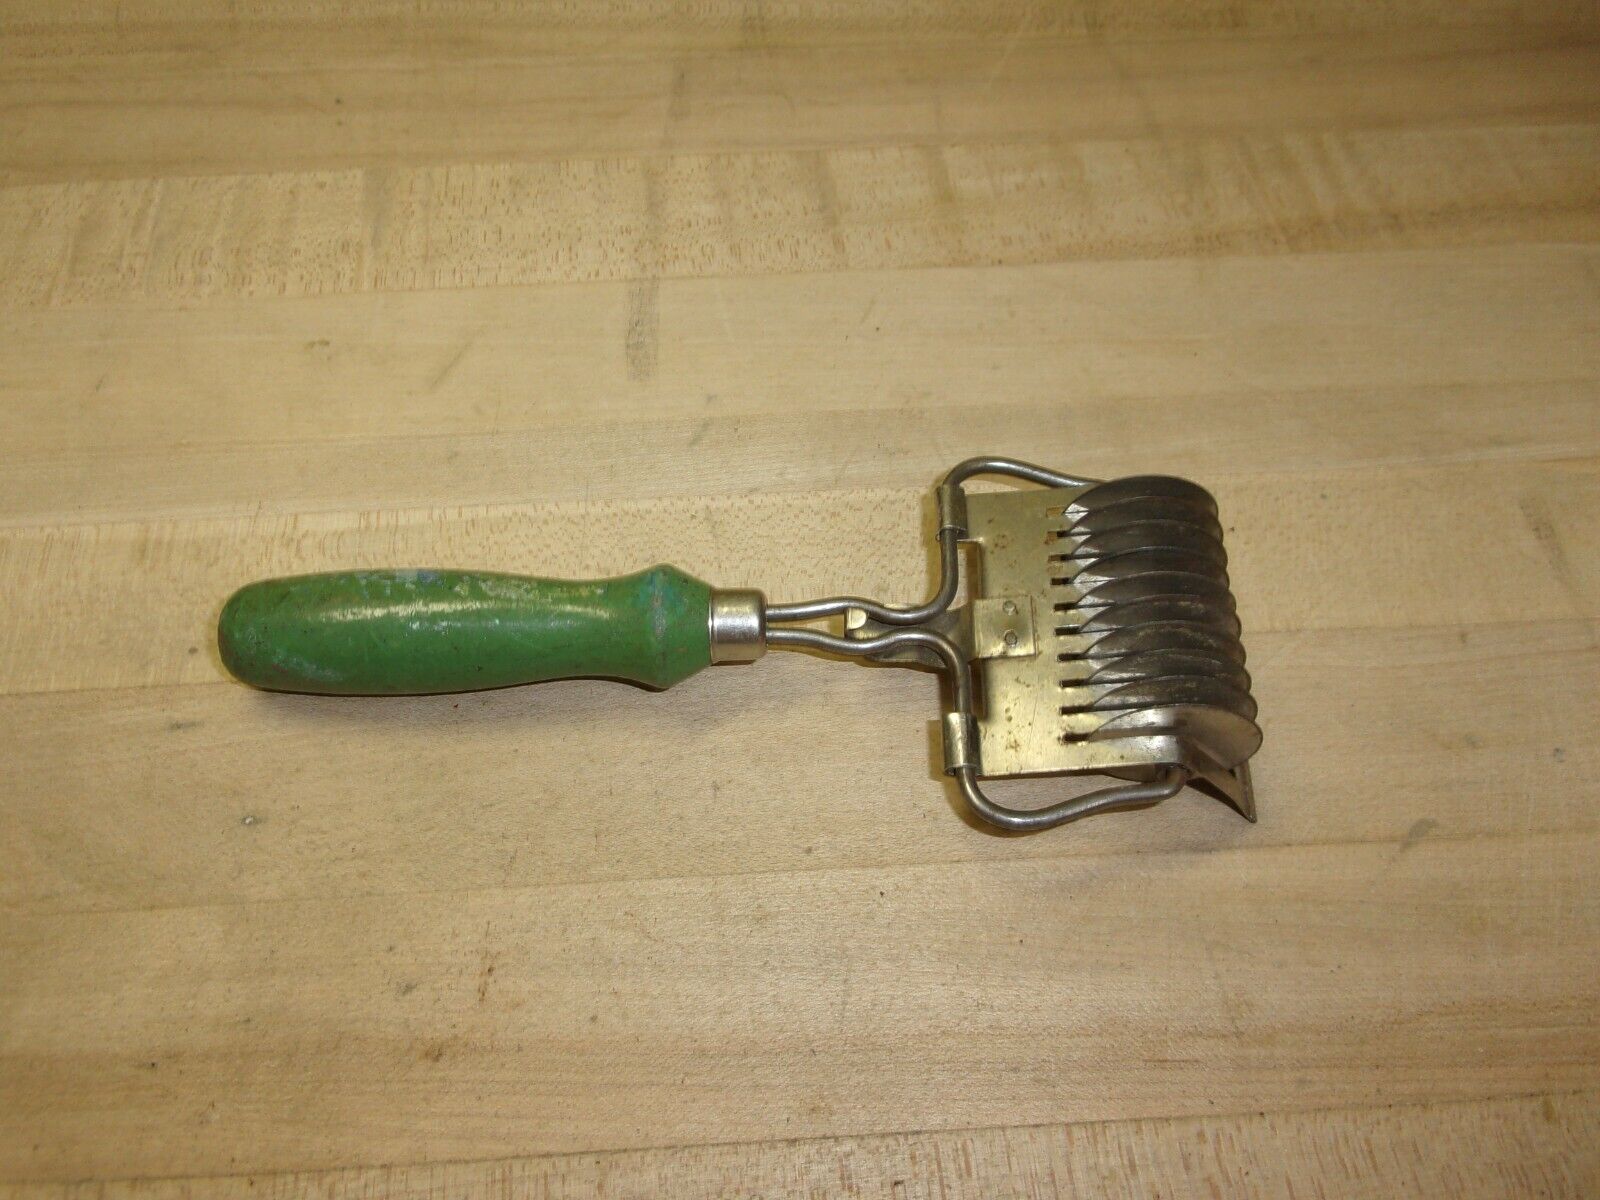 vtg acme rotary mincer pasta cutter wooden green handle mgm co. german 